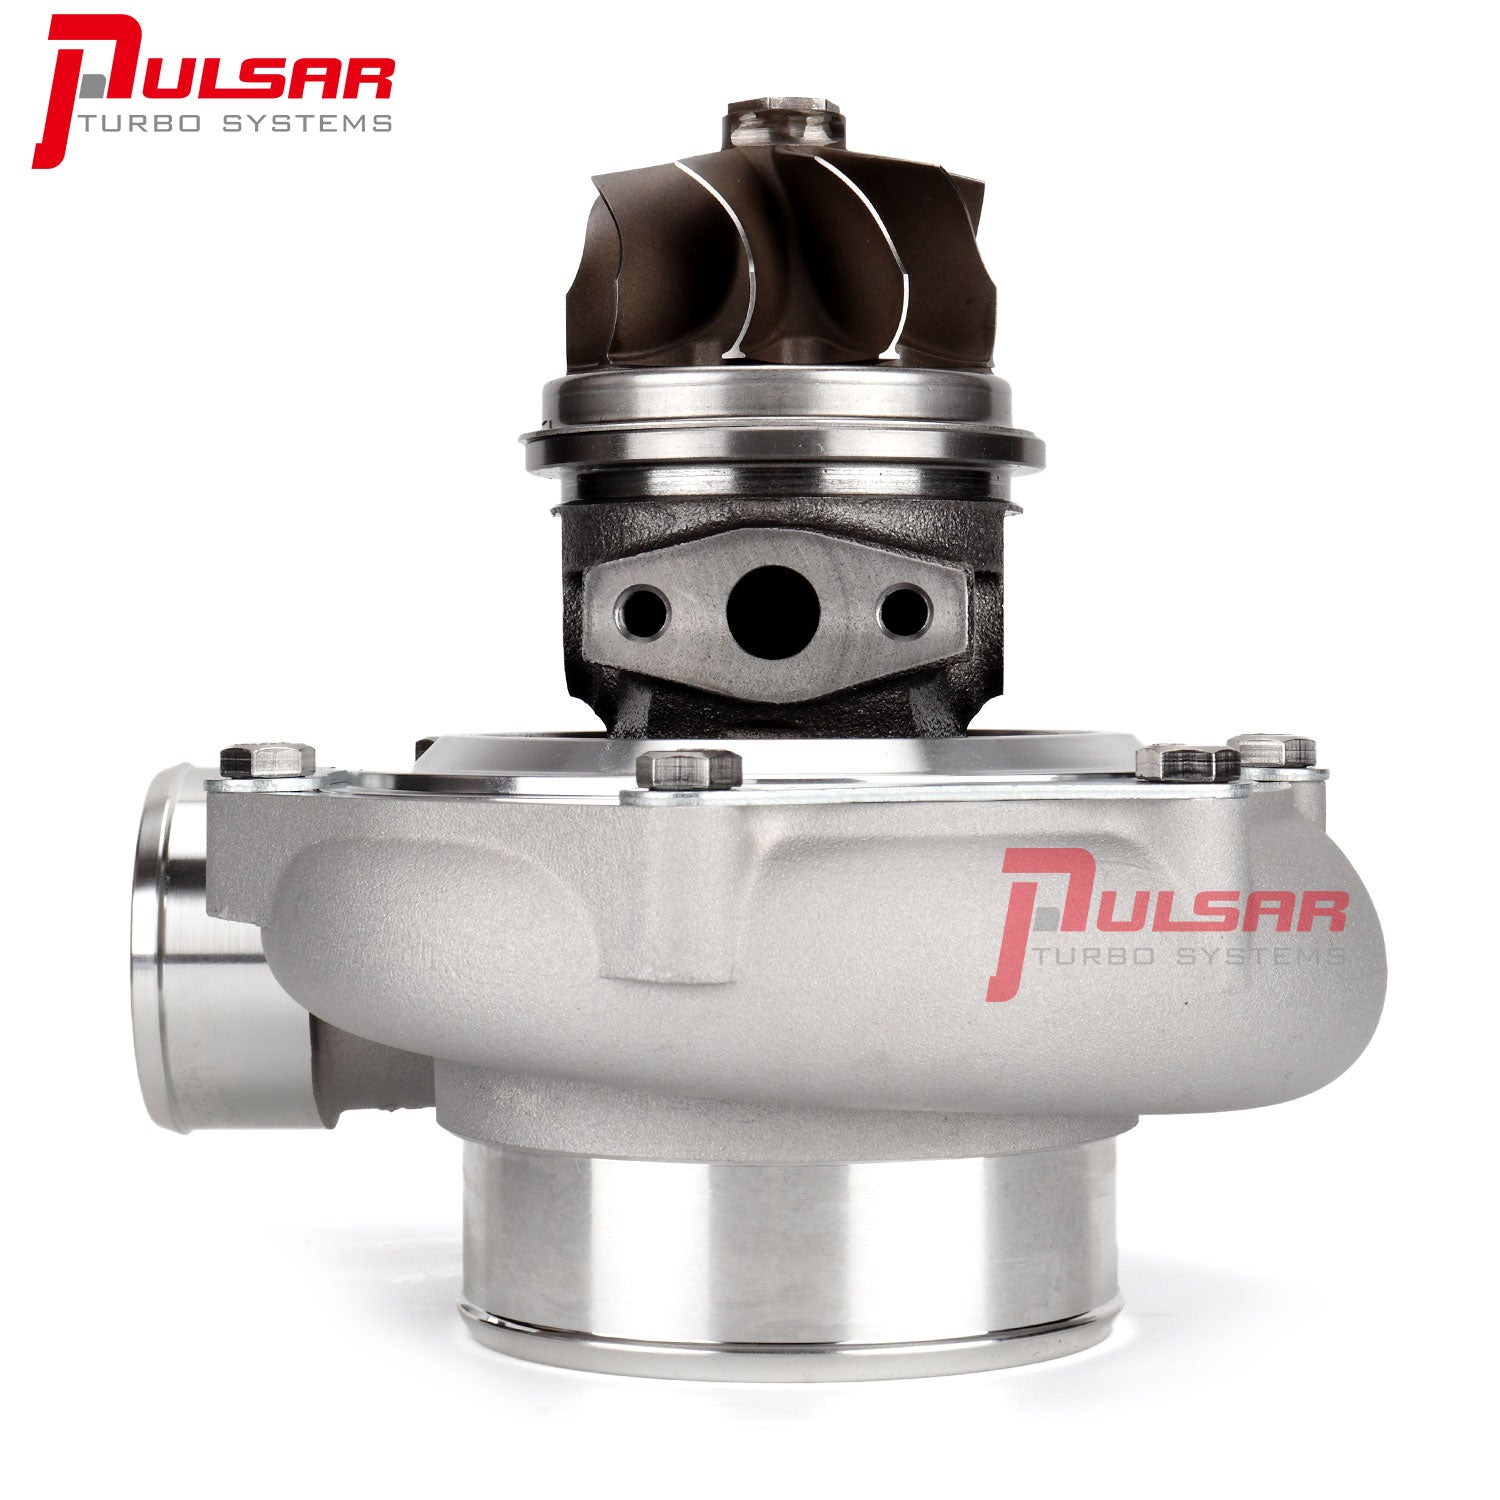 PULSAR Next GEN PSR3582 Supercore for Ford Falcon to replace the factory GT3582R